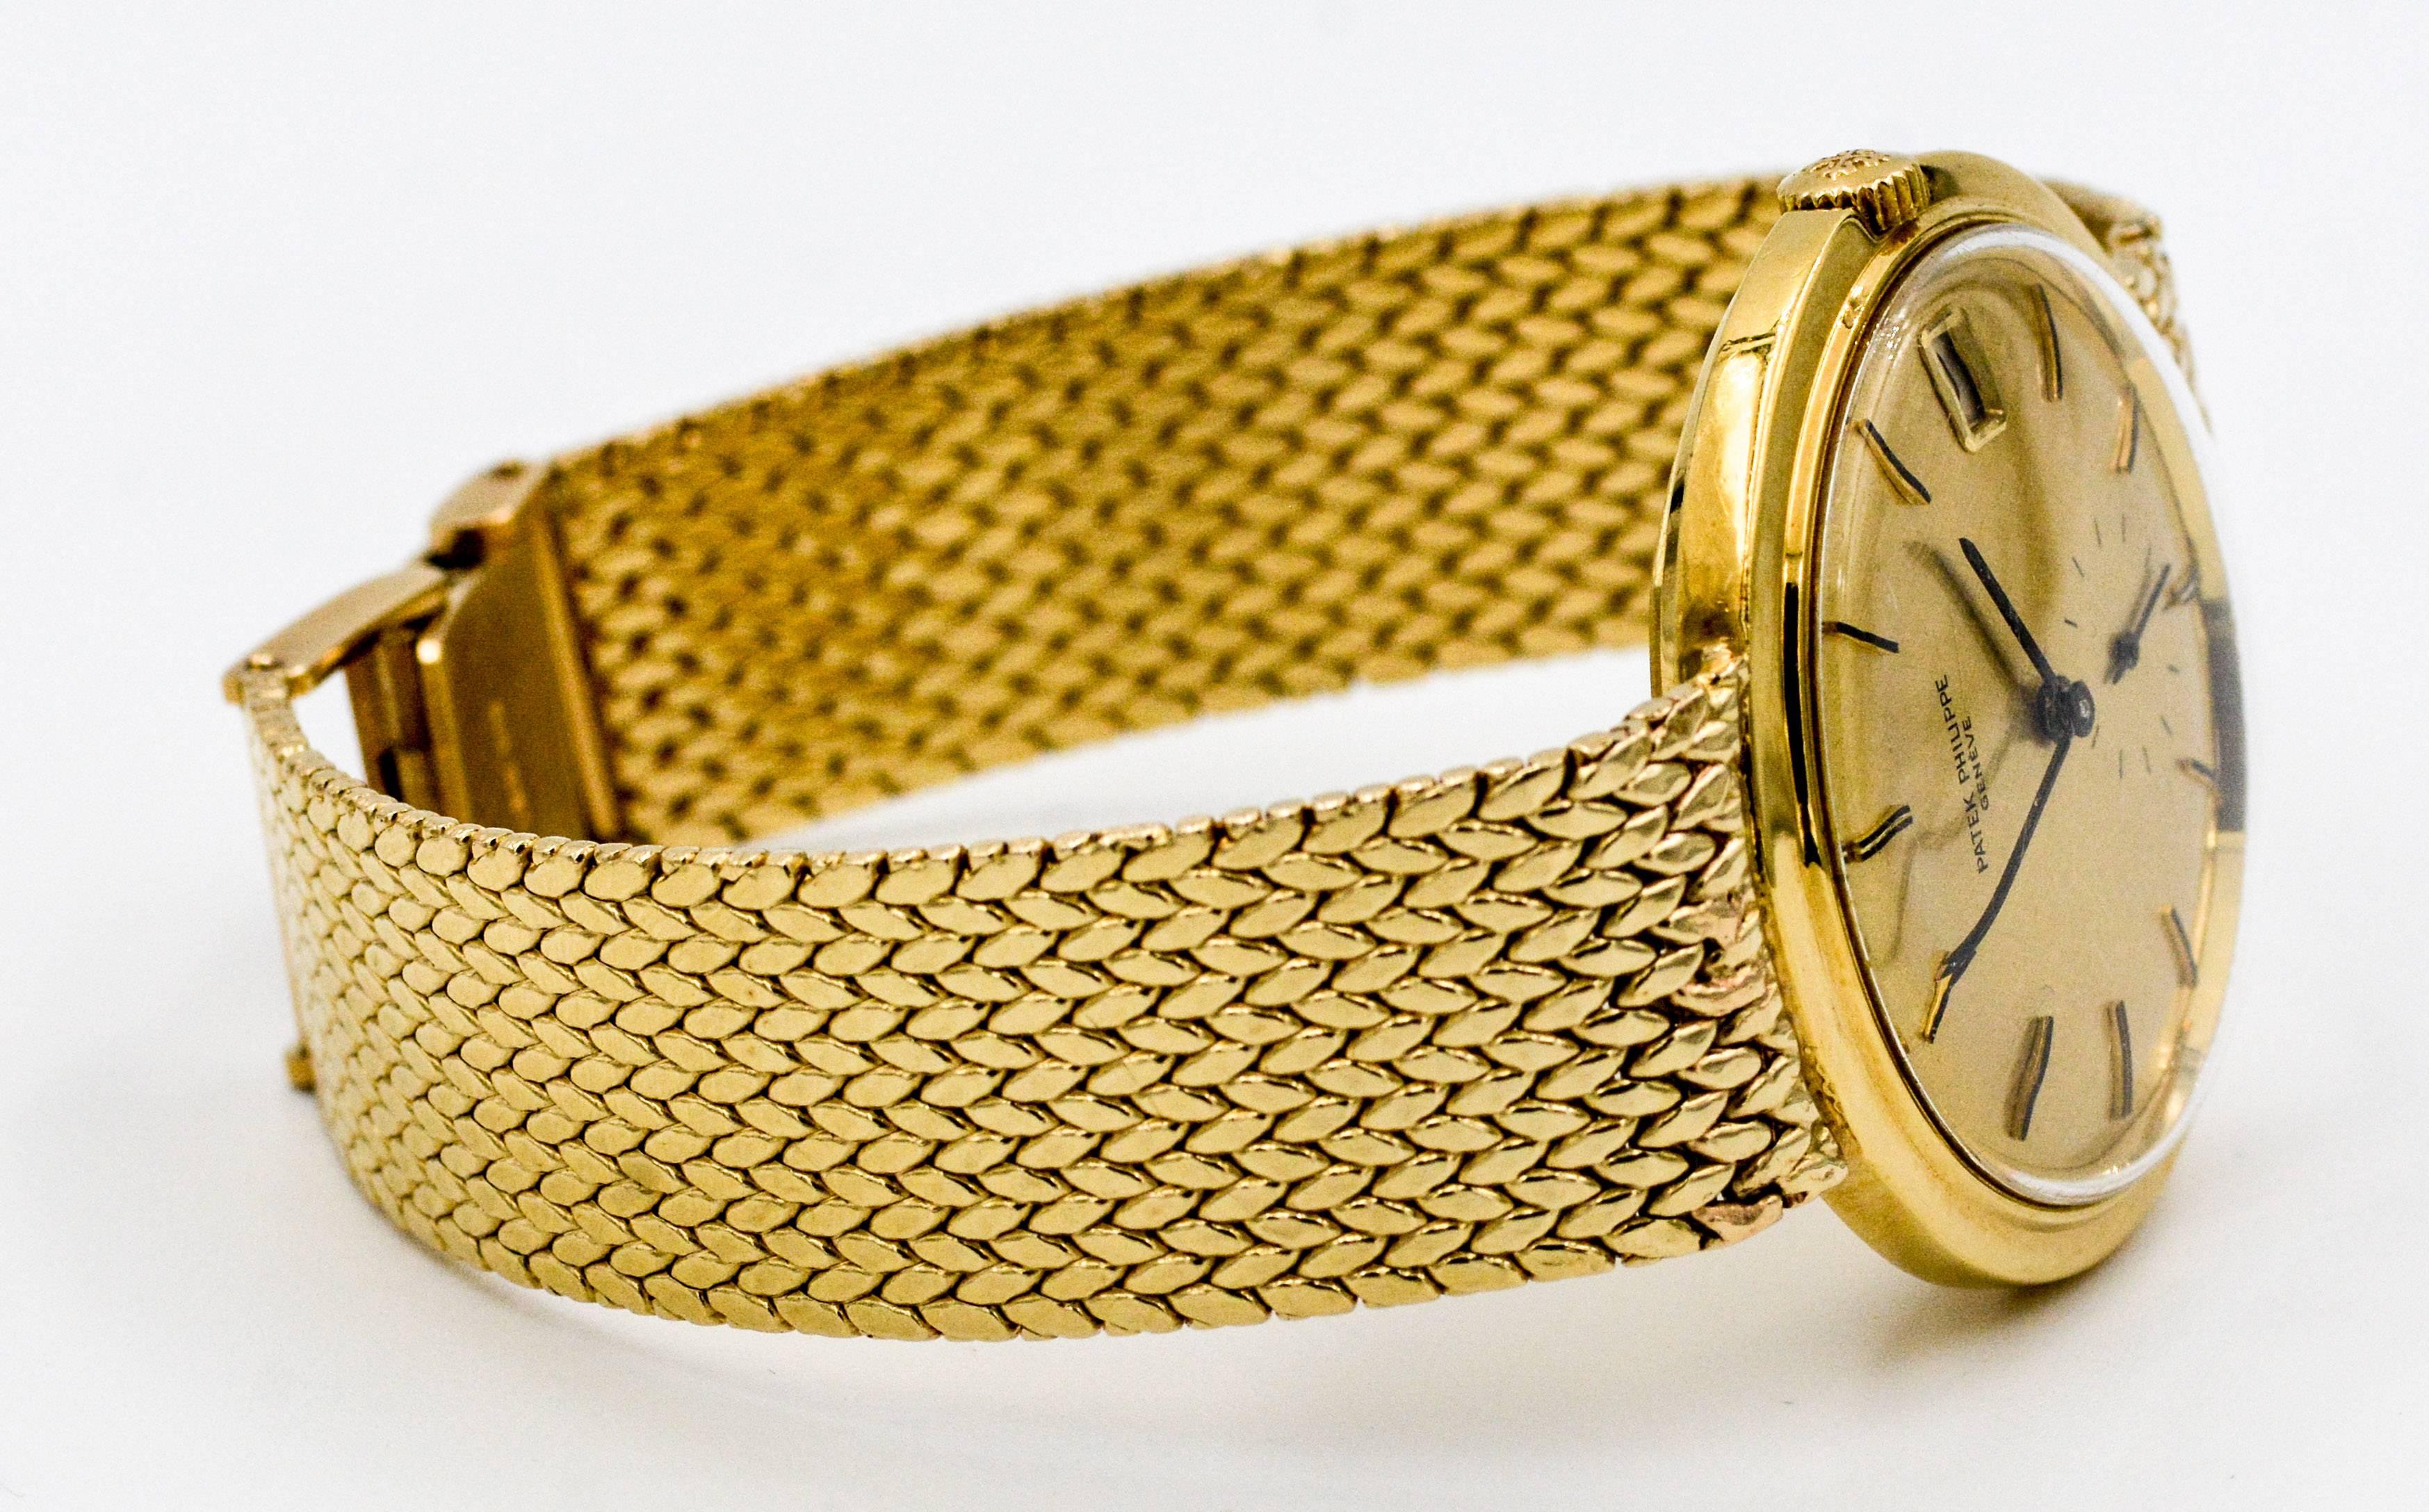 Gents 1966 14kt Yellow Gold Patek Philippe wrist watch containing a mesh type style bracelet in a 36mm case, automatic movement. Reference number 3541